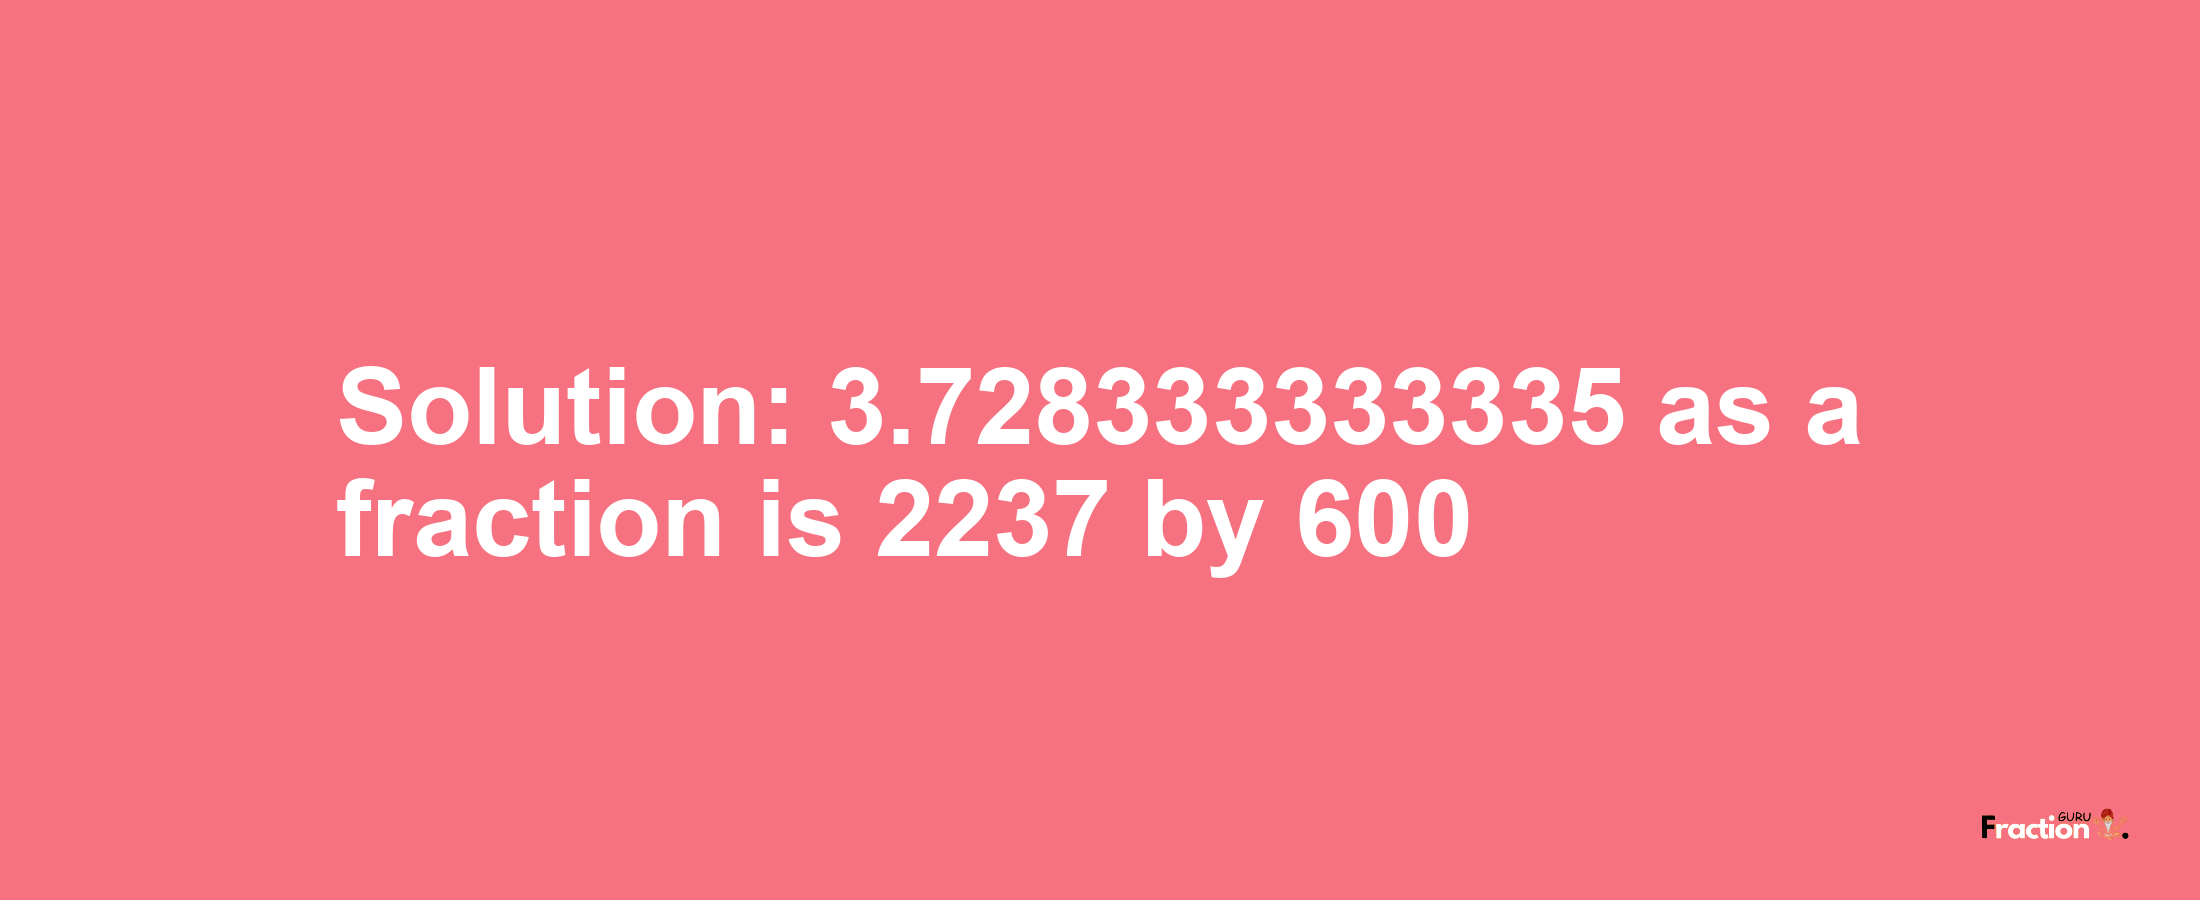 Solution:3.728333333335 as a fraction is 2237/600